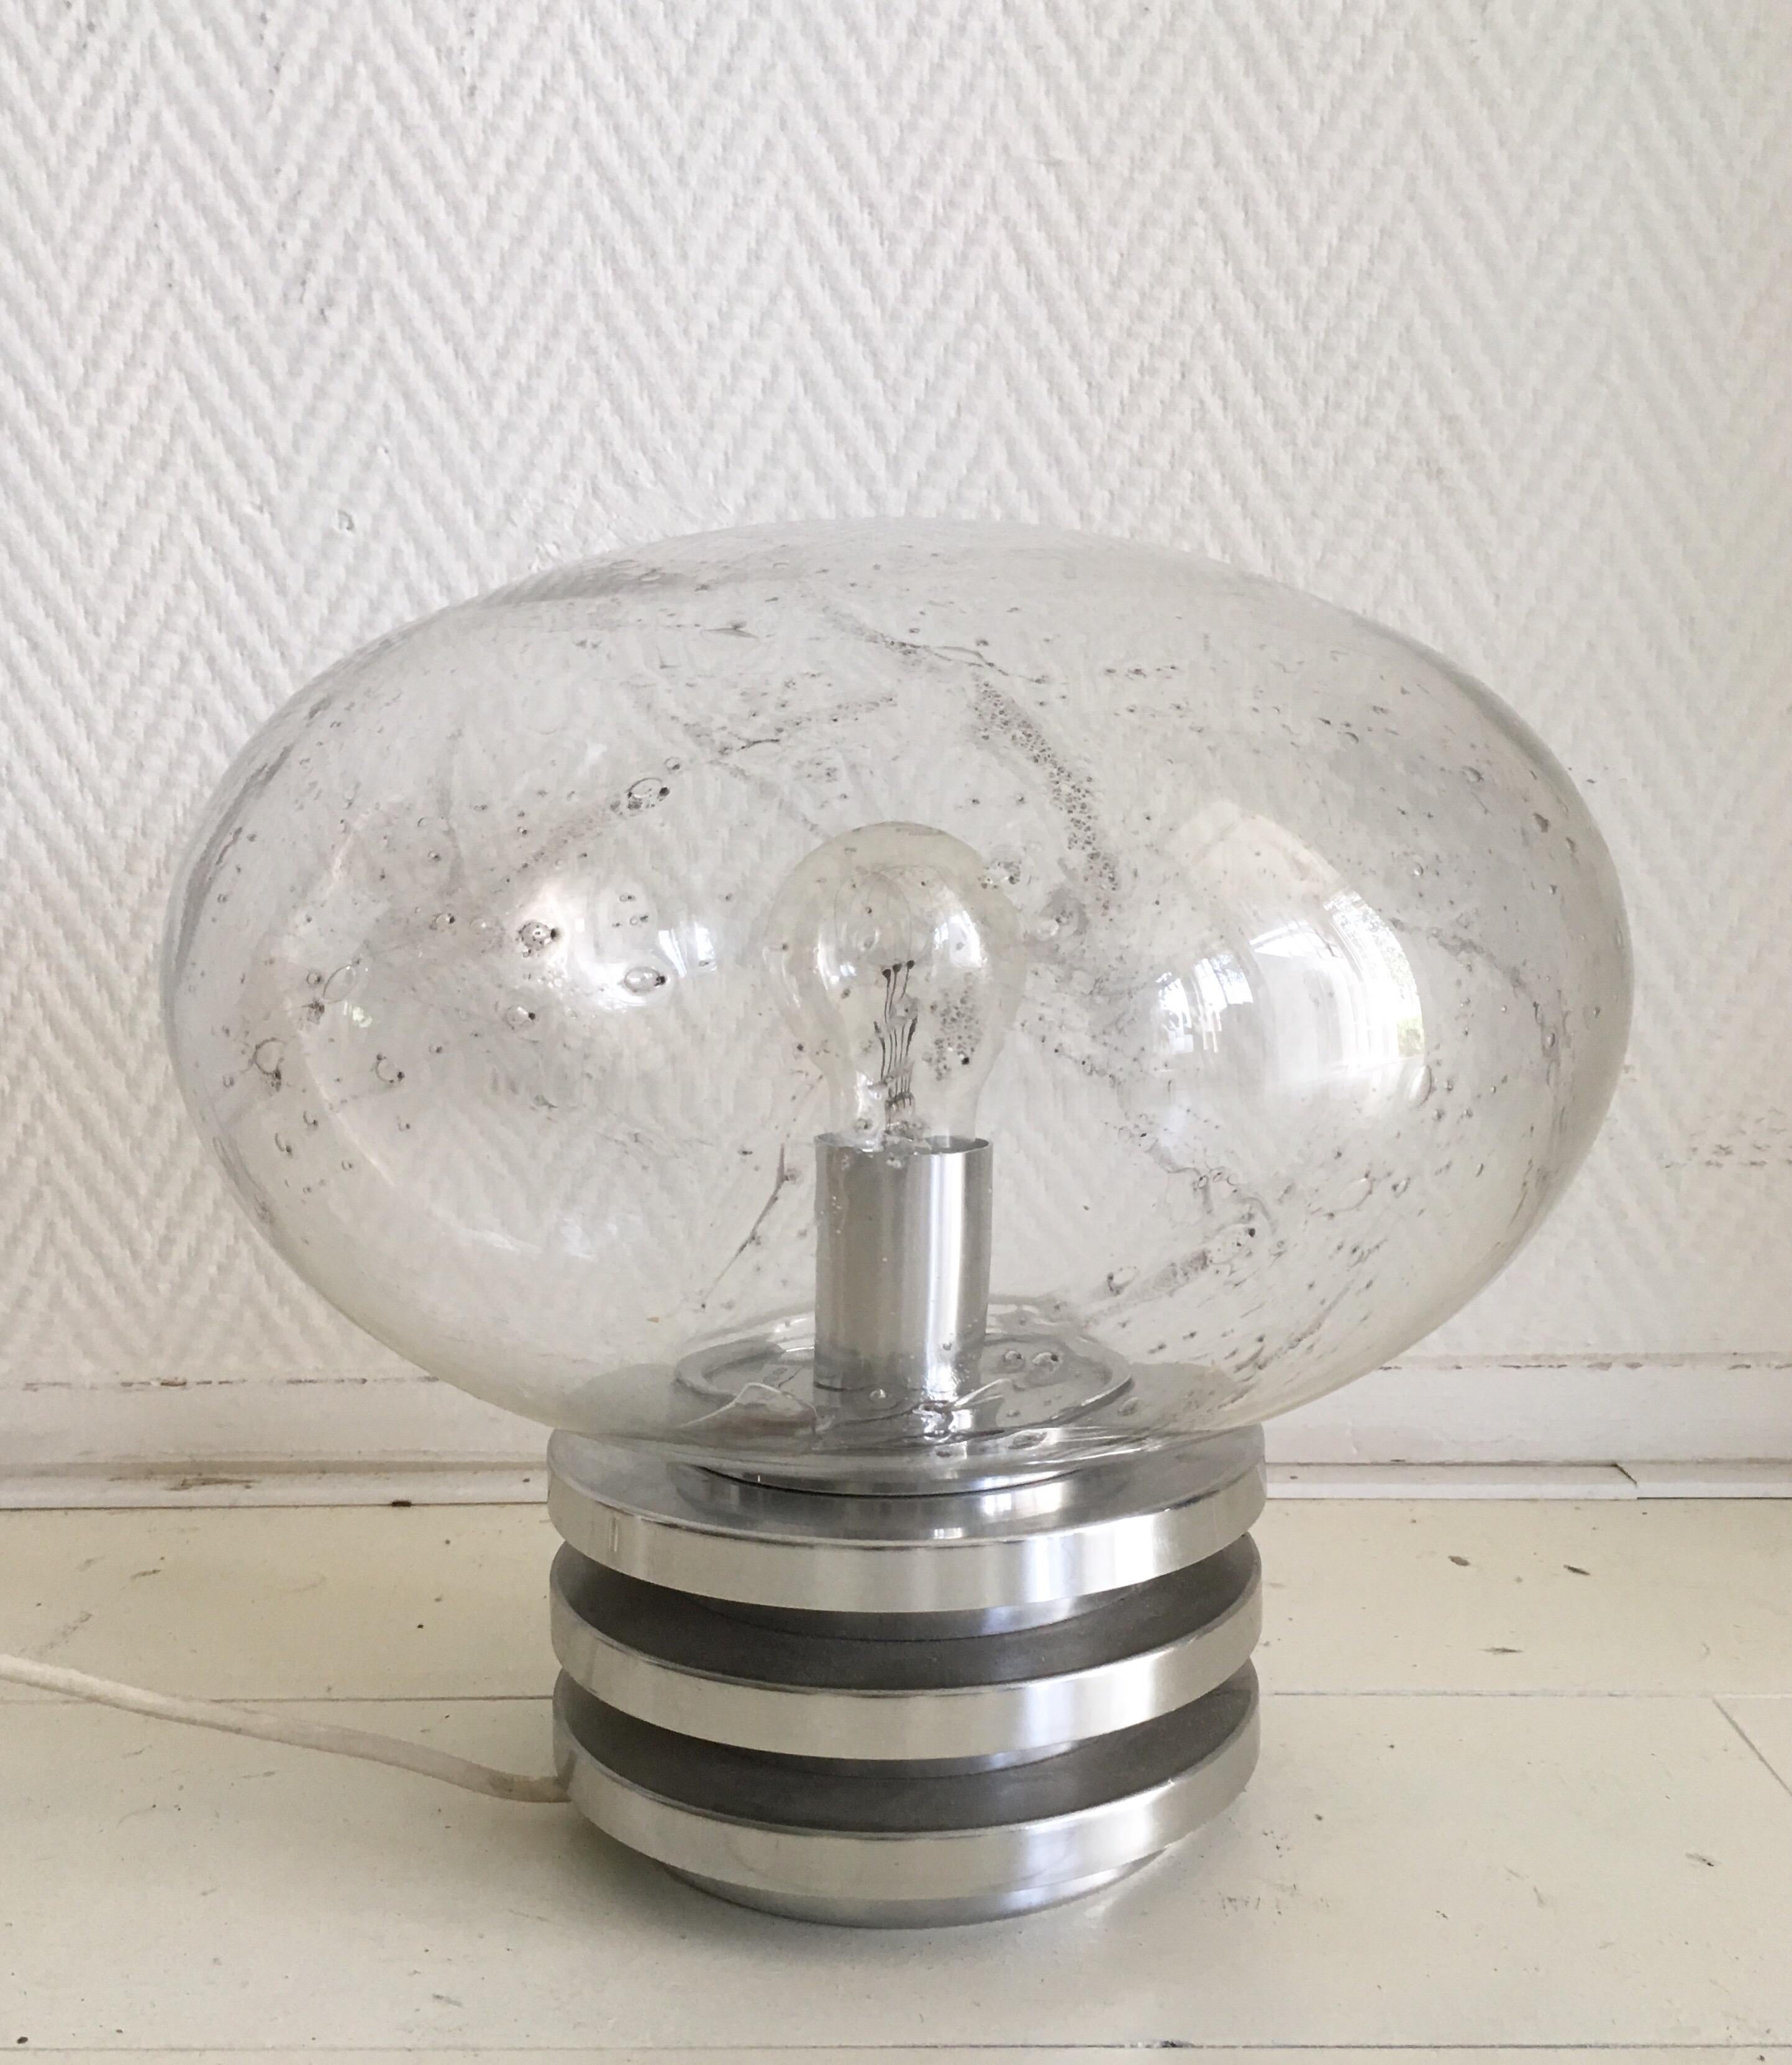 Wonderful piece manufactured by Doria Leuchten Germany, circa 1960s-1970s. The lamp consists of a handblown bubbleglass shade and a metal base. It remains in great condition and shows only minimal wear.